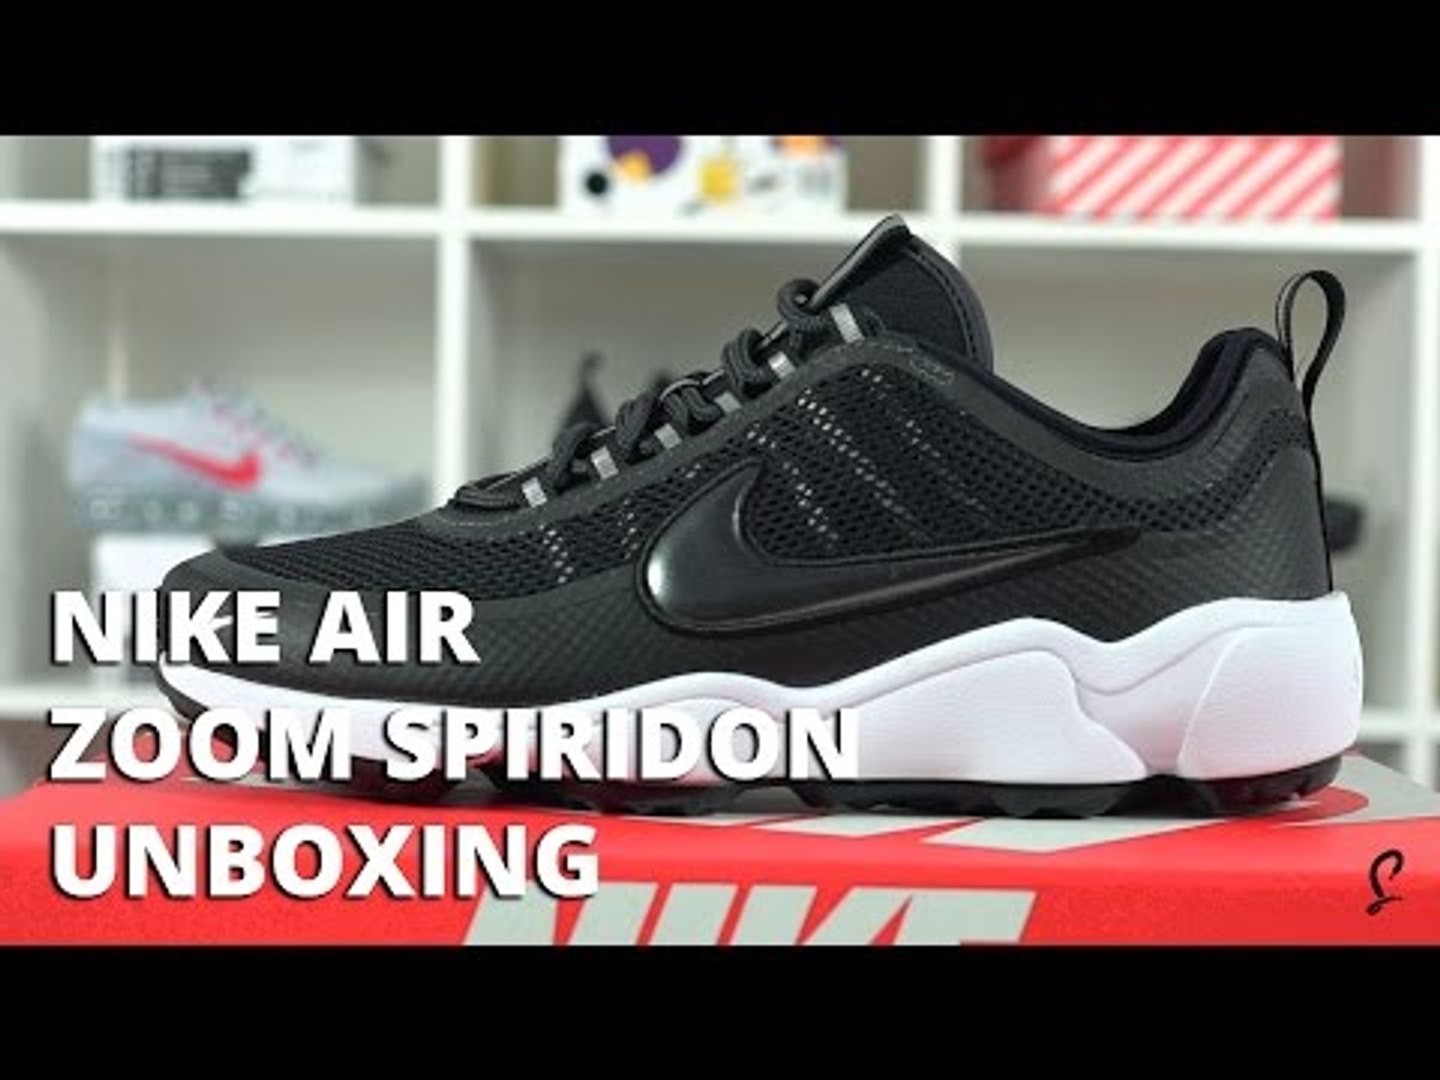 Nike Air Zoom Spiridon Ultra Black White Unboxing / Review - video  Dailymotion